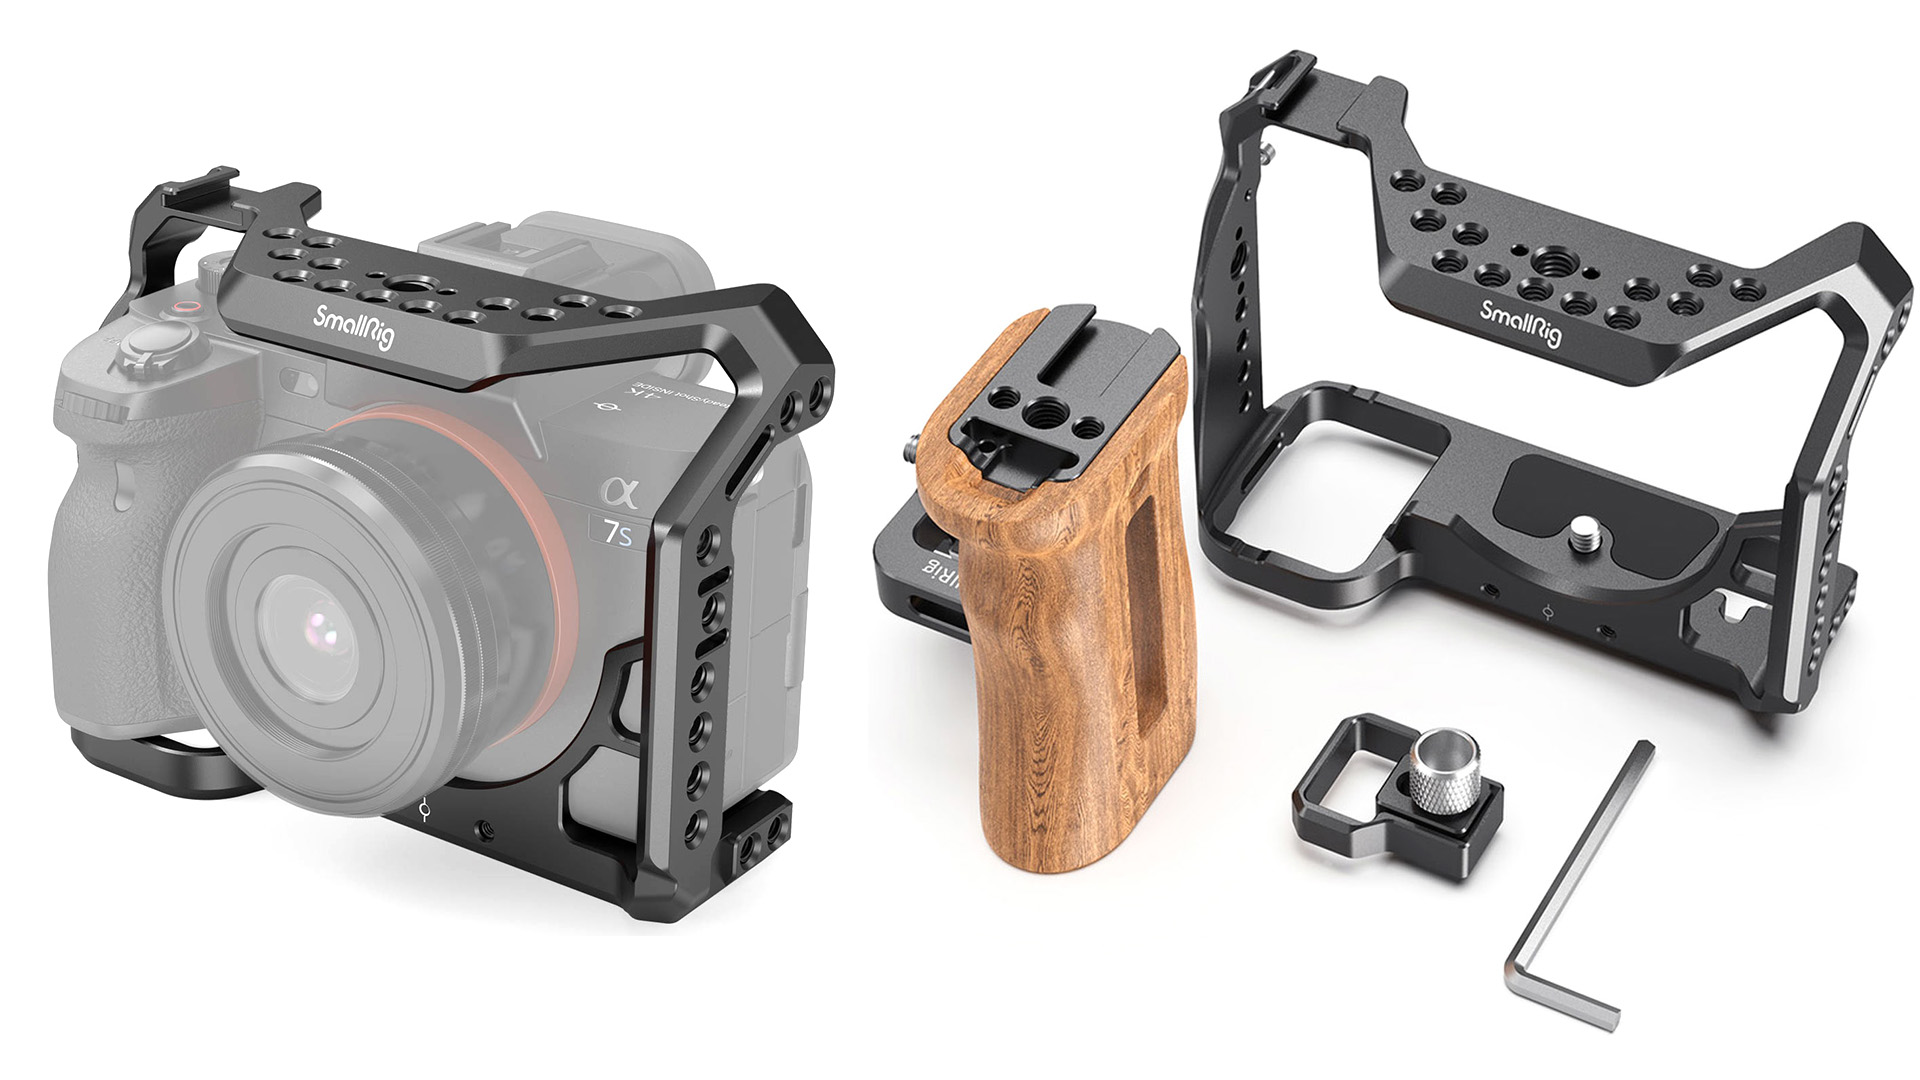 Introducing the Camera Rig for Sony A7sIII